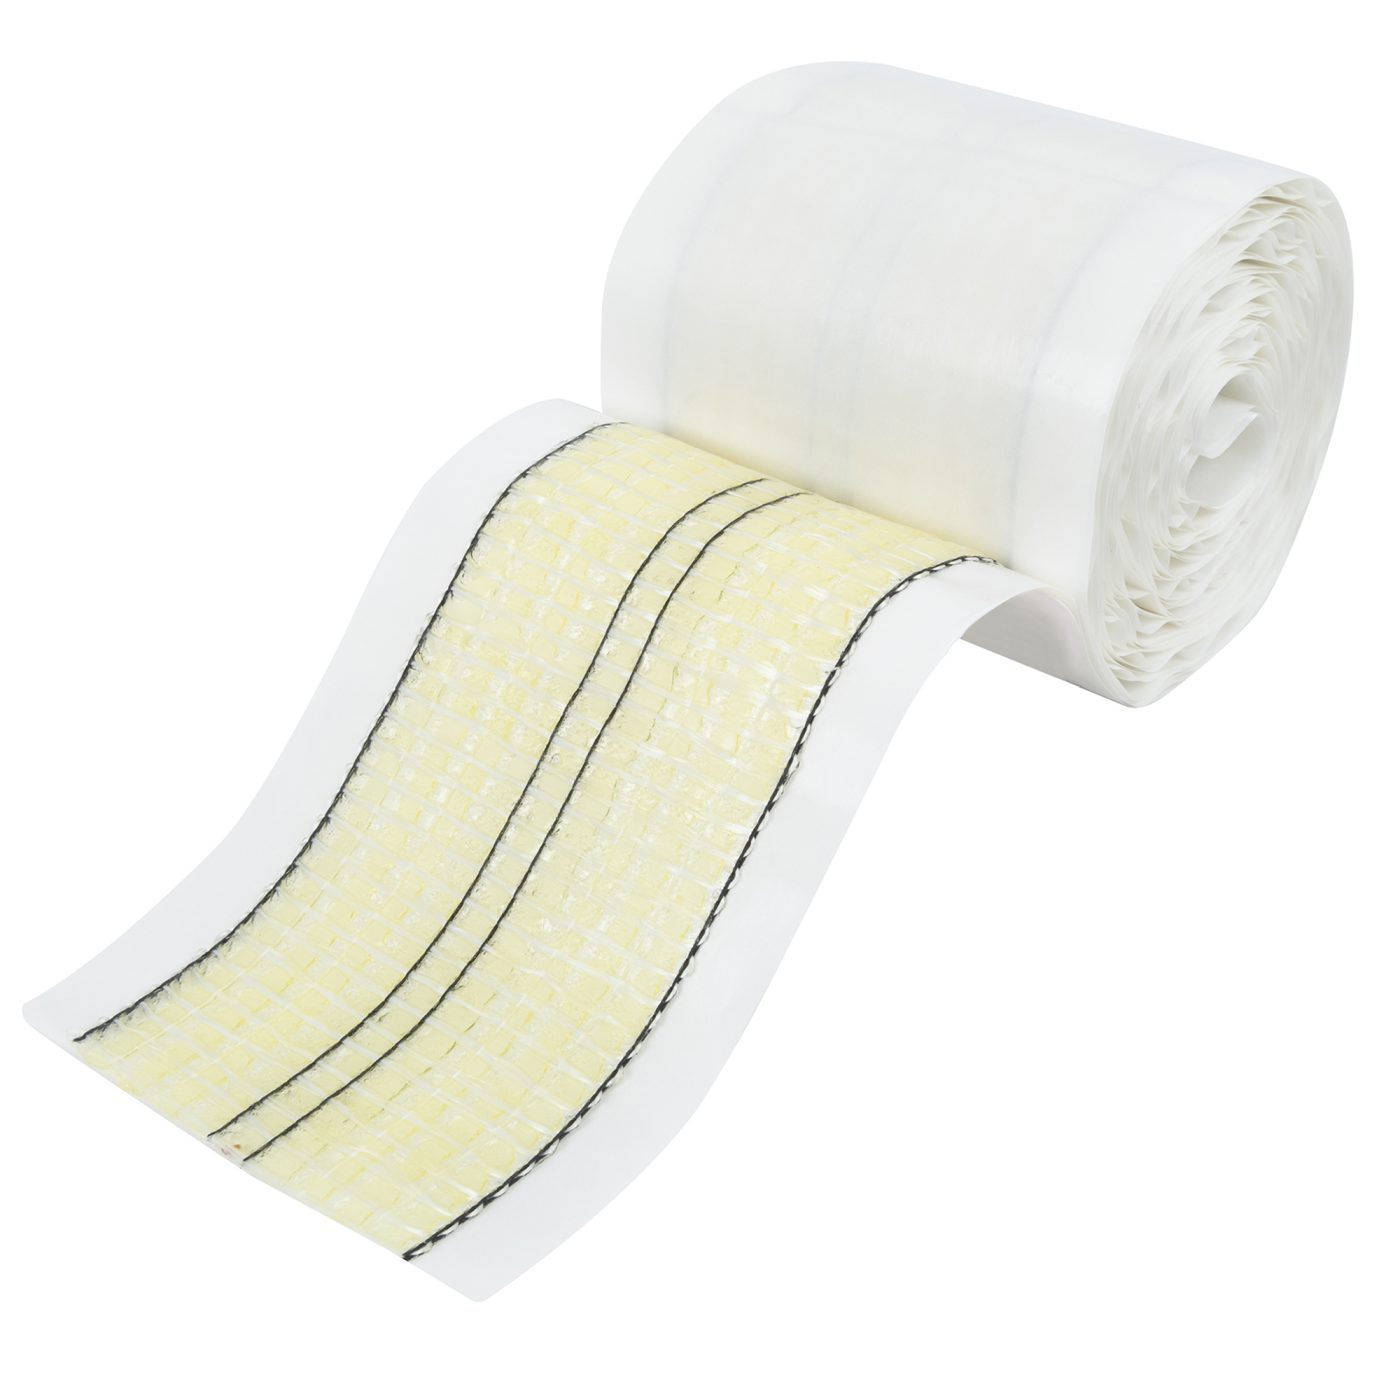 https://www.robertsconsolidated.com/wp-content/uploads/2023/07/ROBERTS_Double-Sided-Carpet-Tape_50-605_Product-Image-scaled.jpg